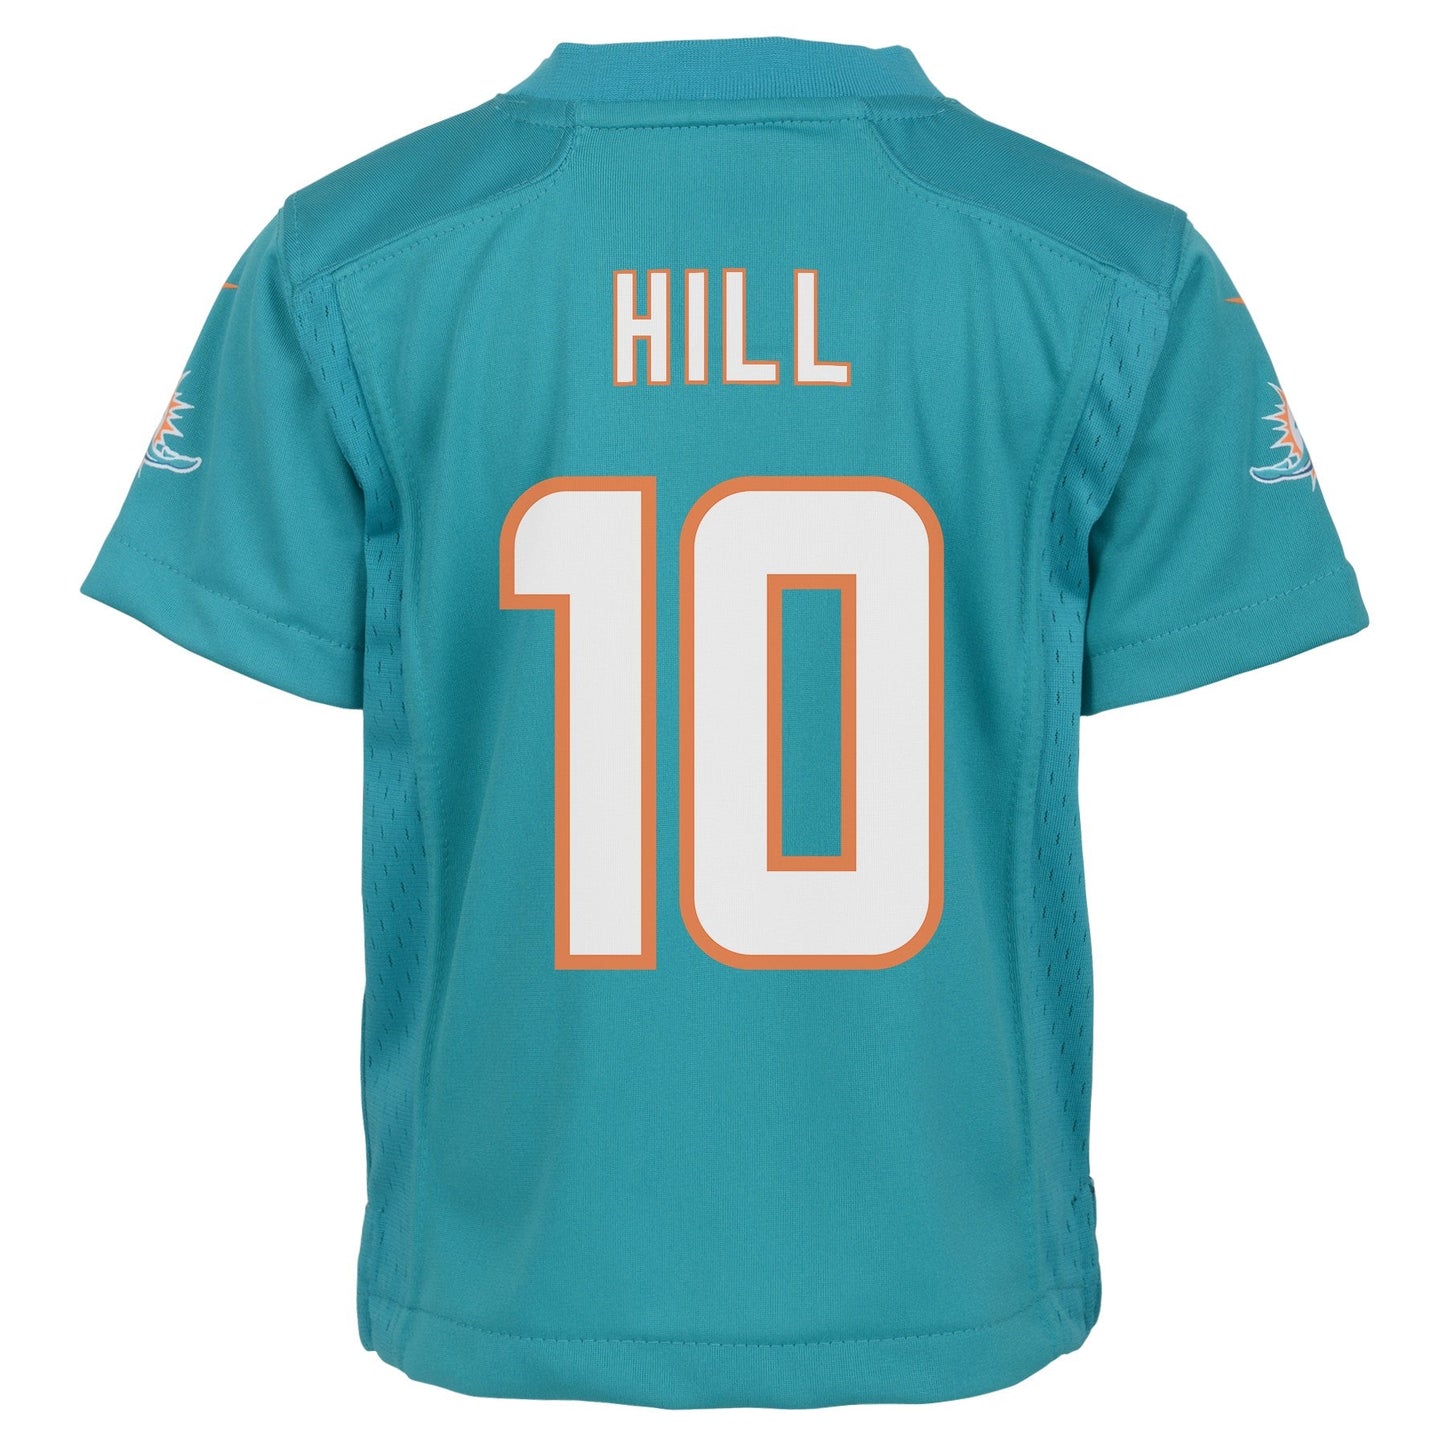 Kids Tyreek Hill Miami Dolphins Teal Child Nike Replica Jersey